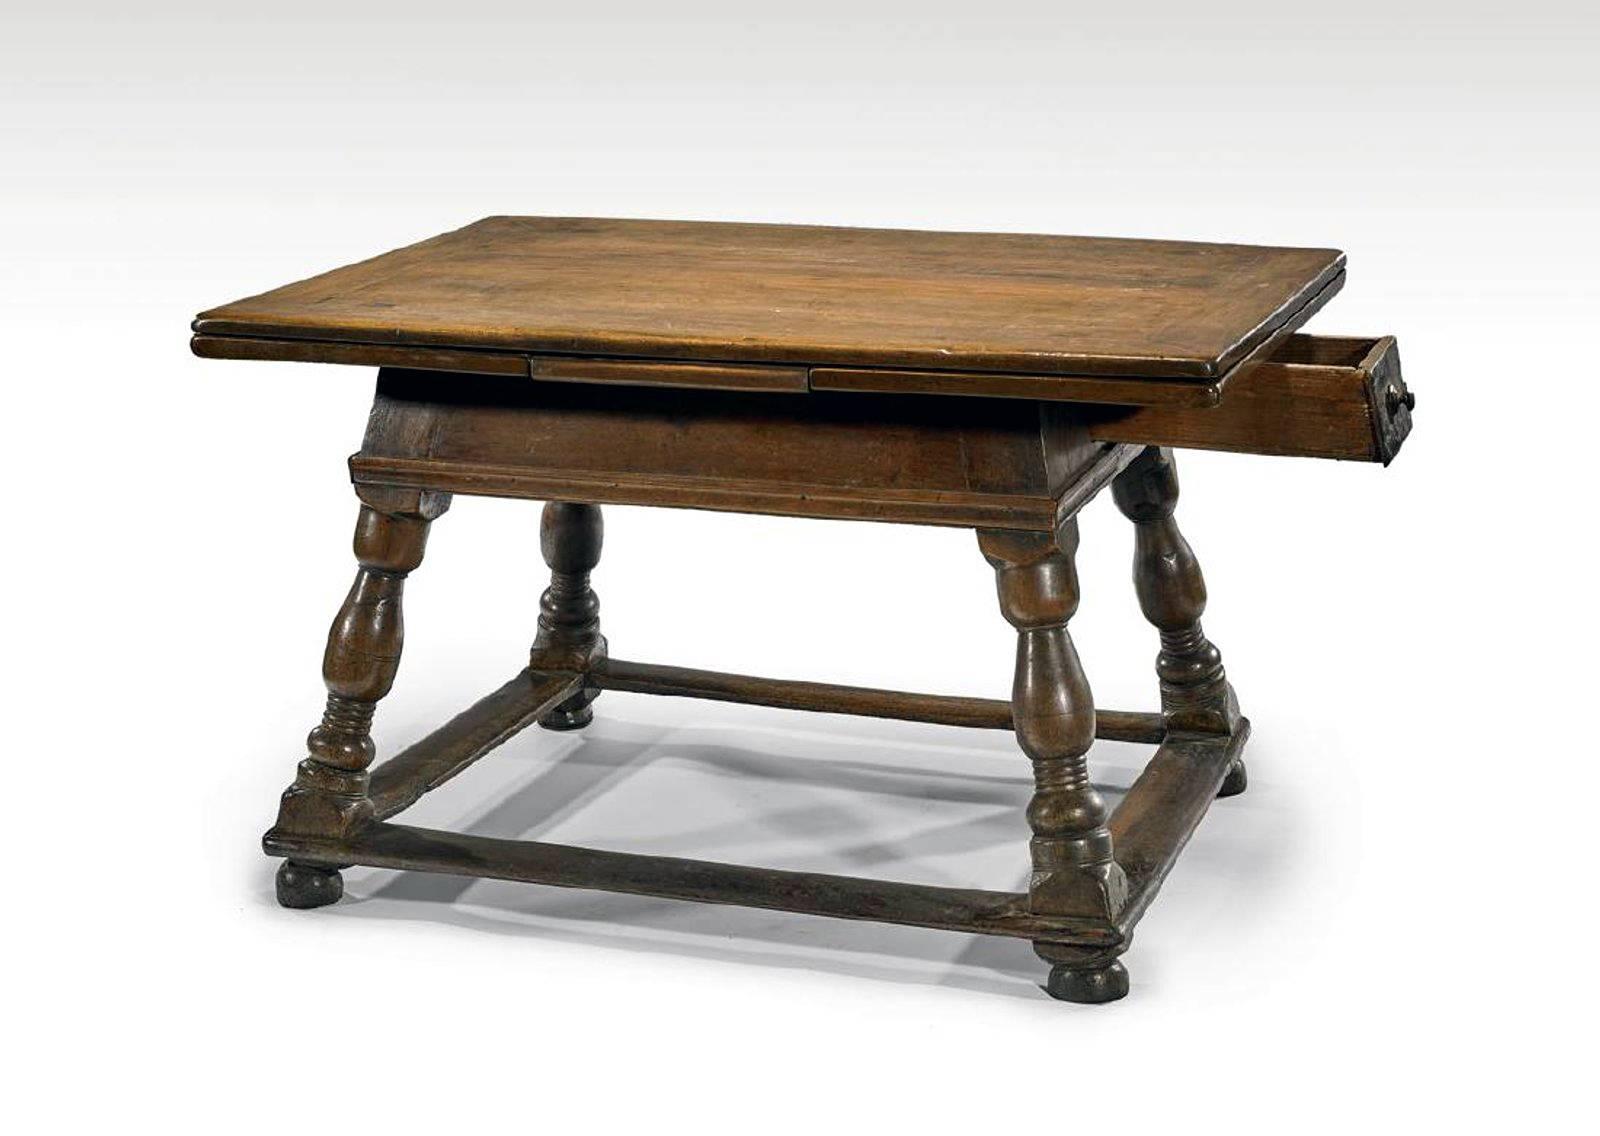 A fabulous antique Swiss wood tavern table circa late 17th to early 18th century, Known as Jogl table in Swiss Alps and German Bavarian region, the table features a carved rectangular top with a long frieze drawer to one side, two hidden draw-leaves